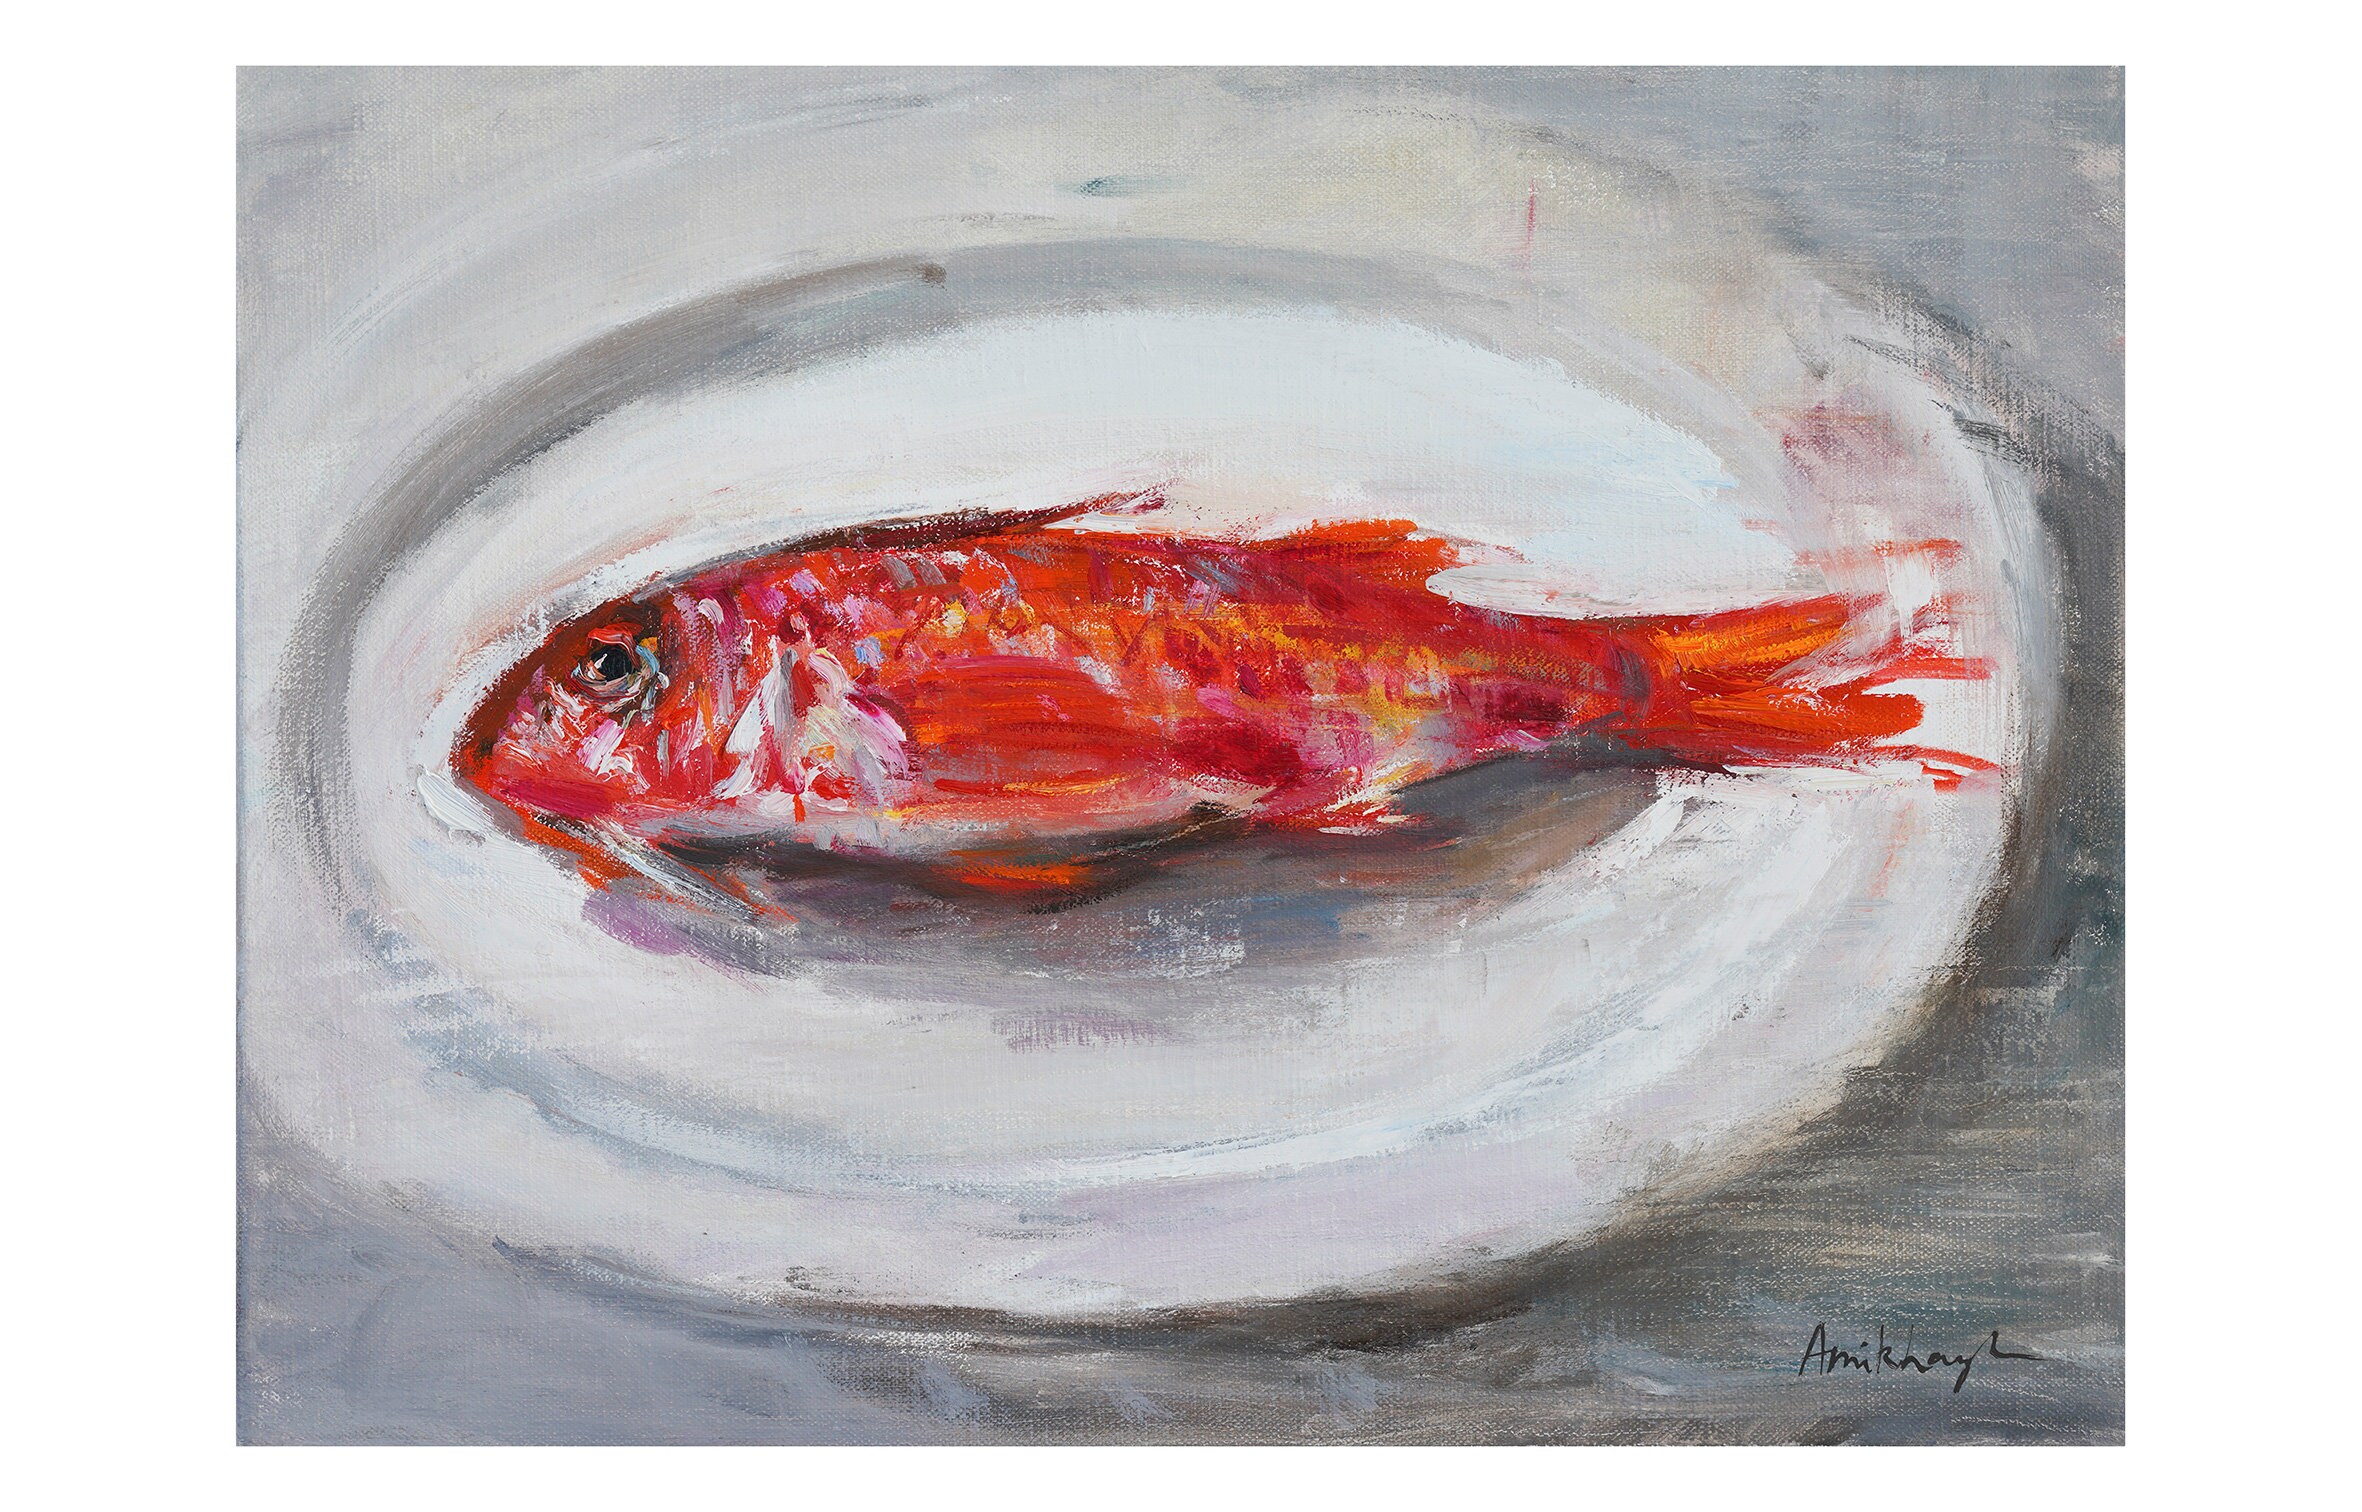 Red Mullet On White Plate, Original Oil Painting Stretched Linen Canvas Paintings Food Seafood Still Life Fishes Fishy Fish Foody Kitchen